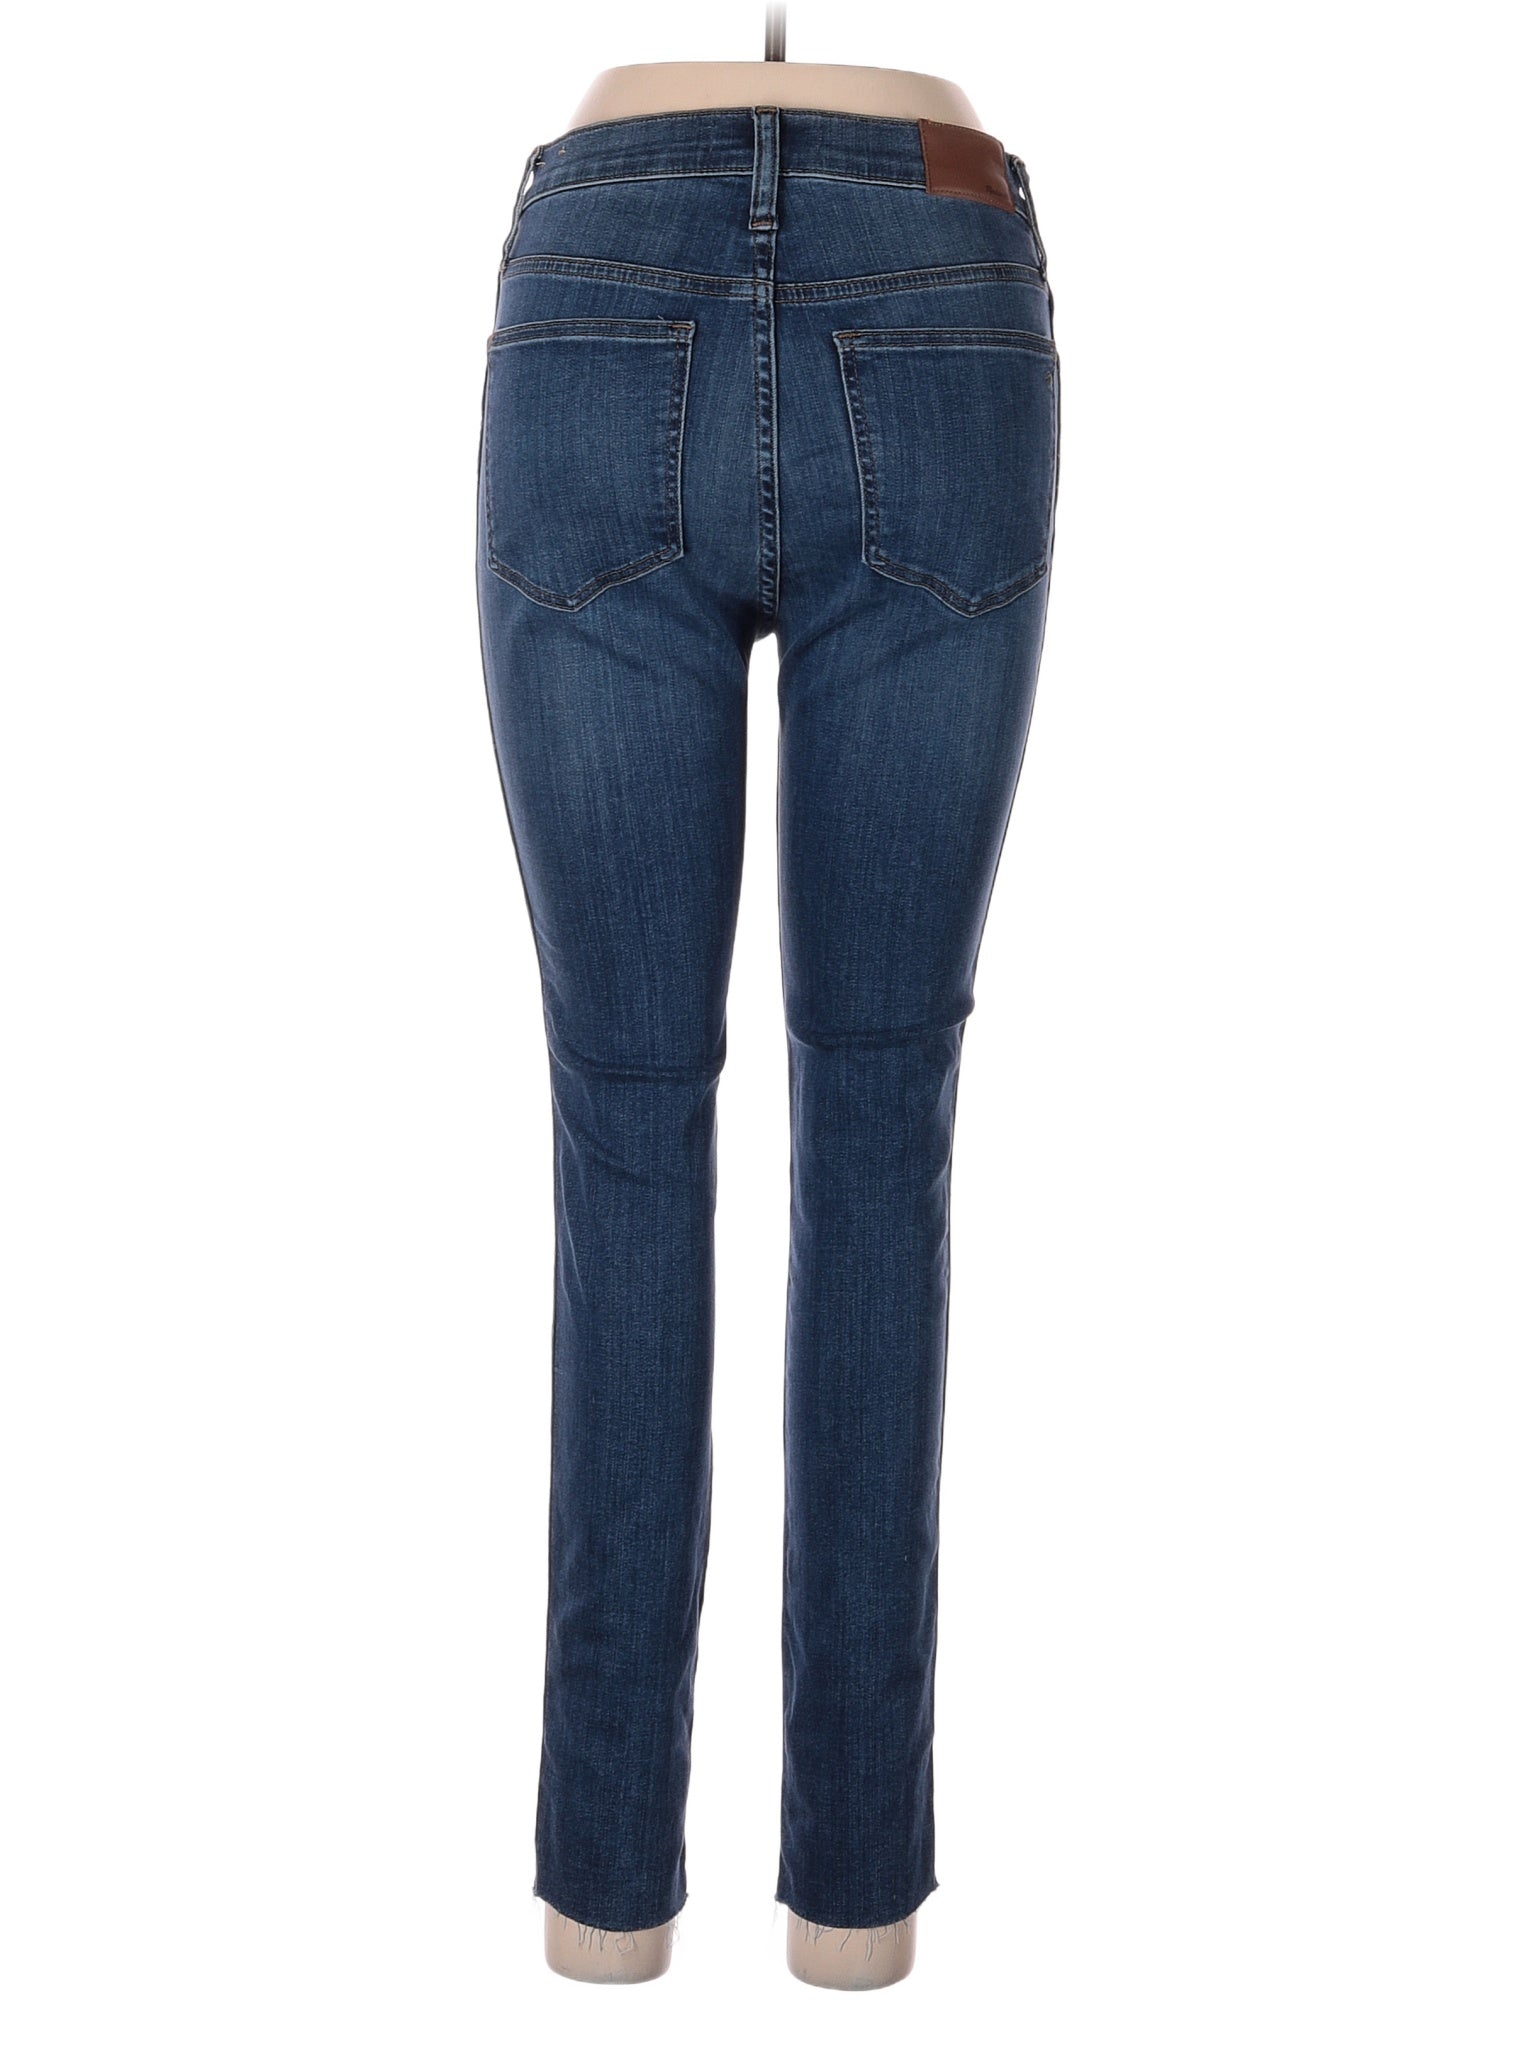 High-Rise Skinny 10" High-Rise Skinny Jeans In Brinville Wash: Button-Front TENCEL&trade; Denim Edition in Dark Wash waist size - 28